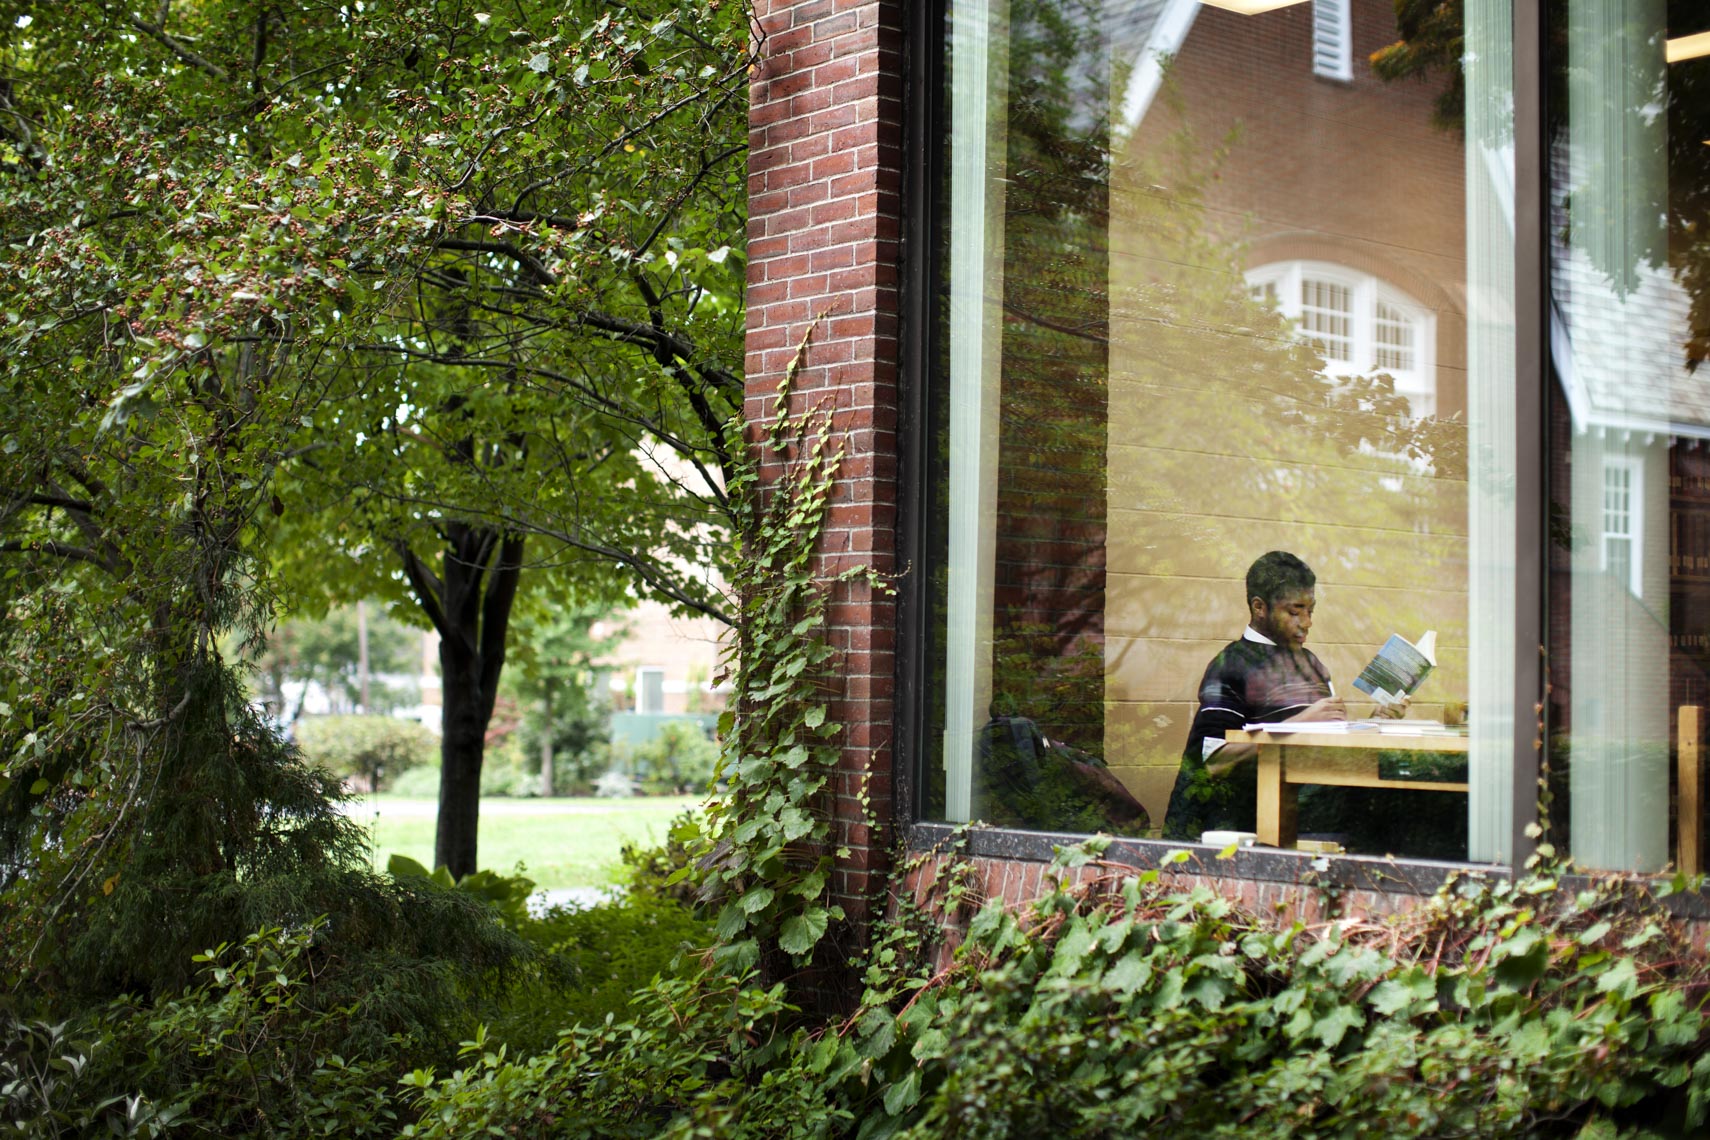 A student studies in a college campus library as seen from the outside at dusk in a photo by Ryan Donnell